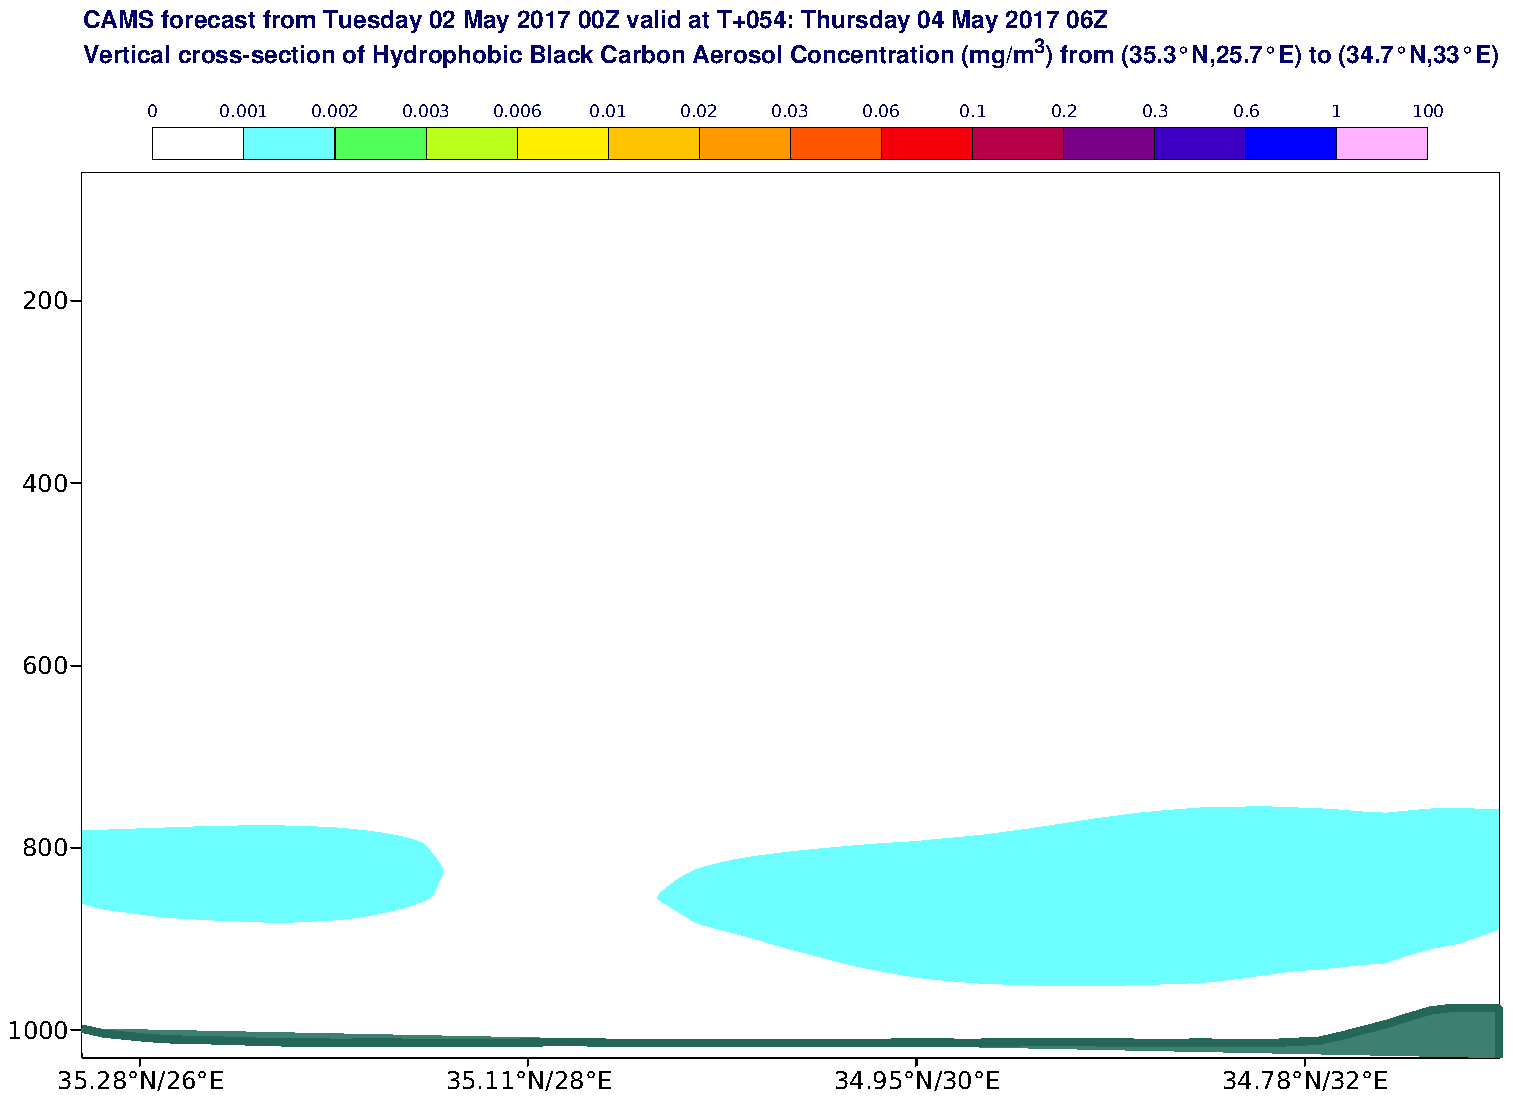 Vertical cross-section of Hydrophobic Black Carbon Aerosol Concentration (mg/m3) valid at T54 - 2017-05-04 06:00